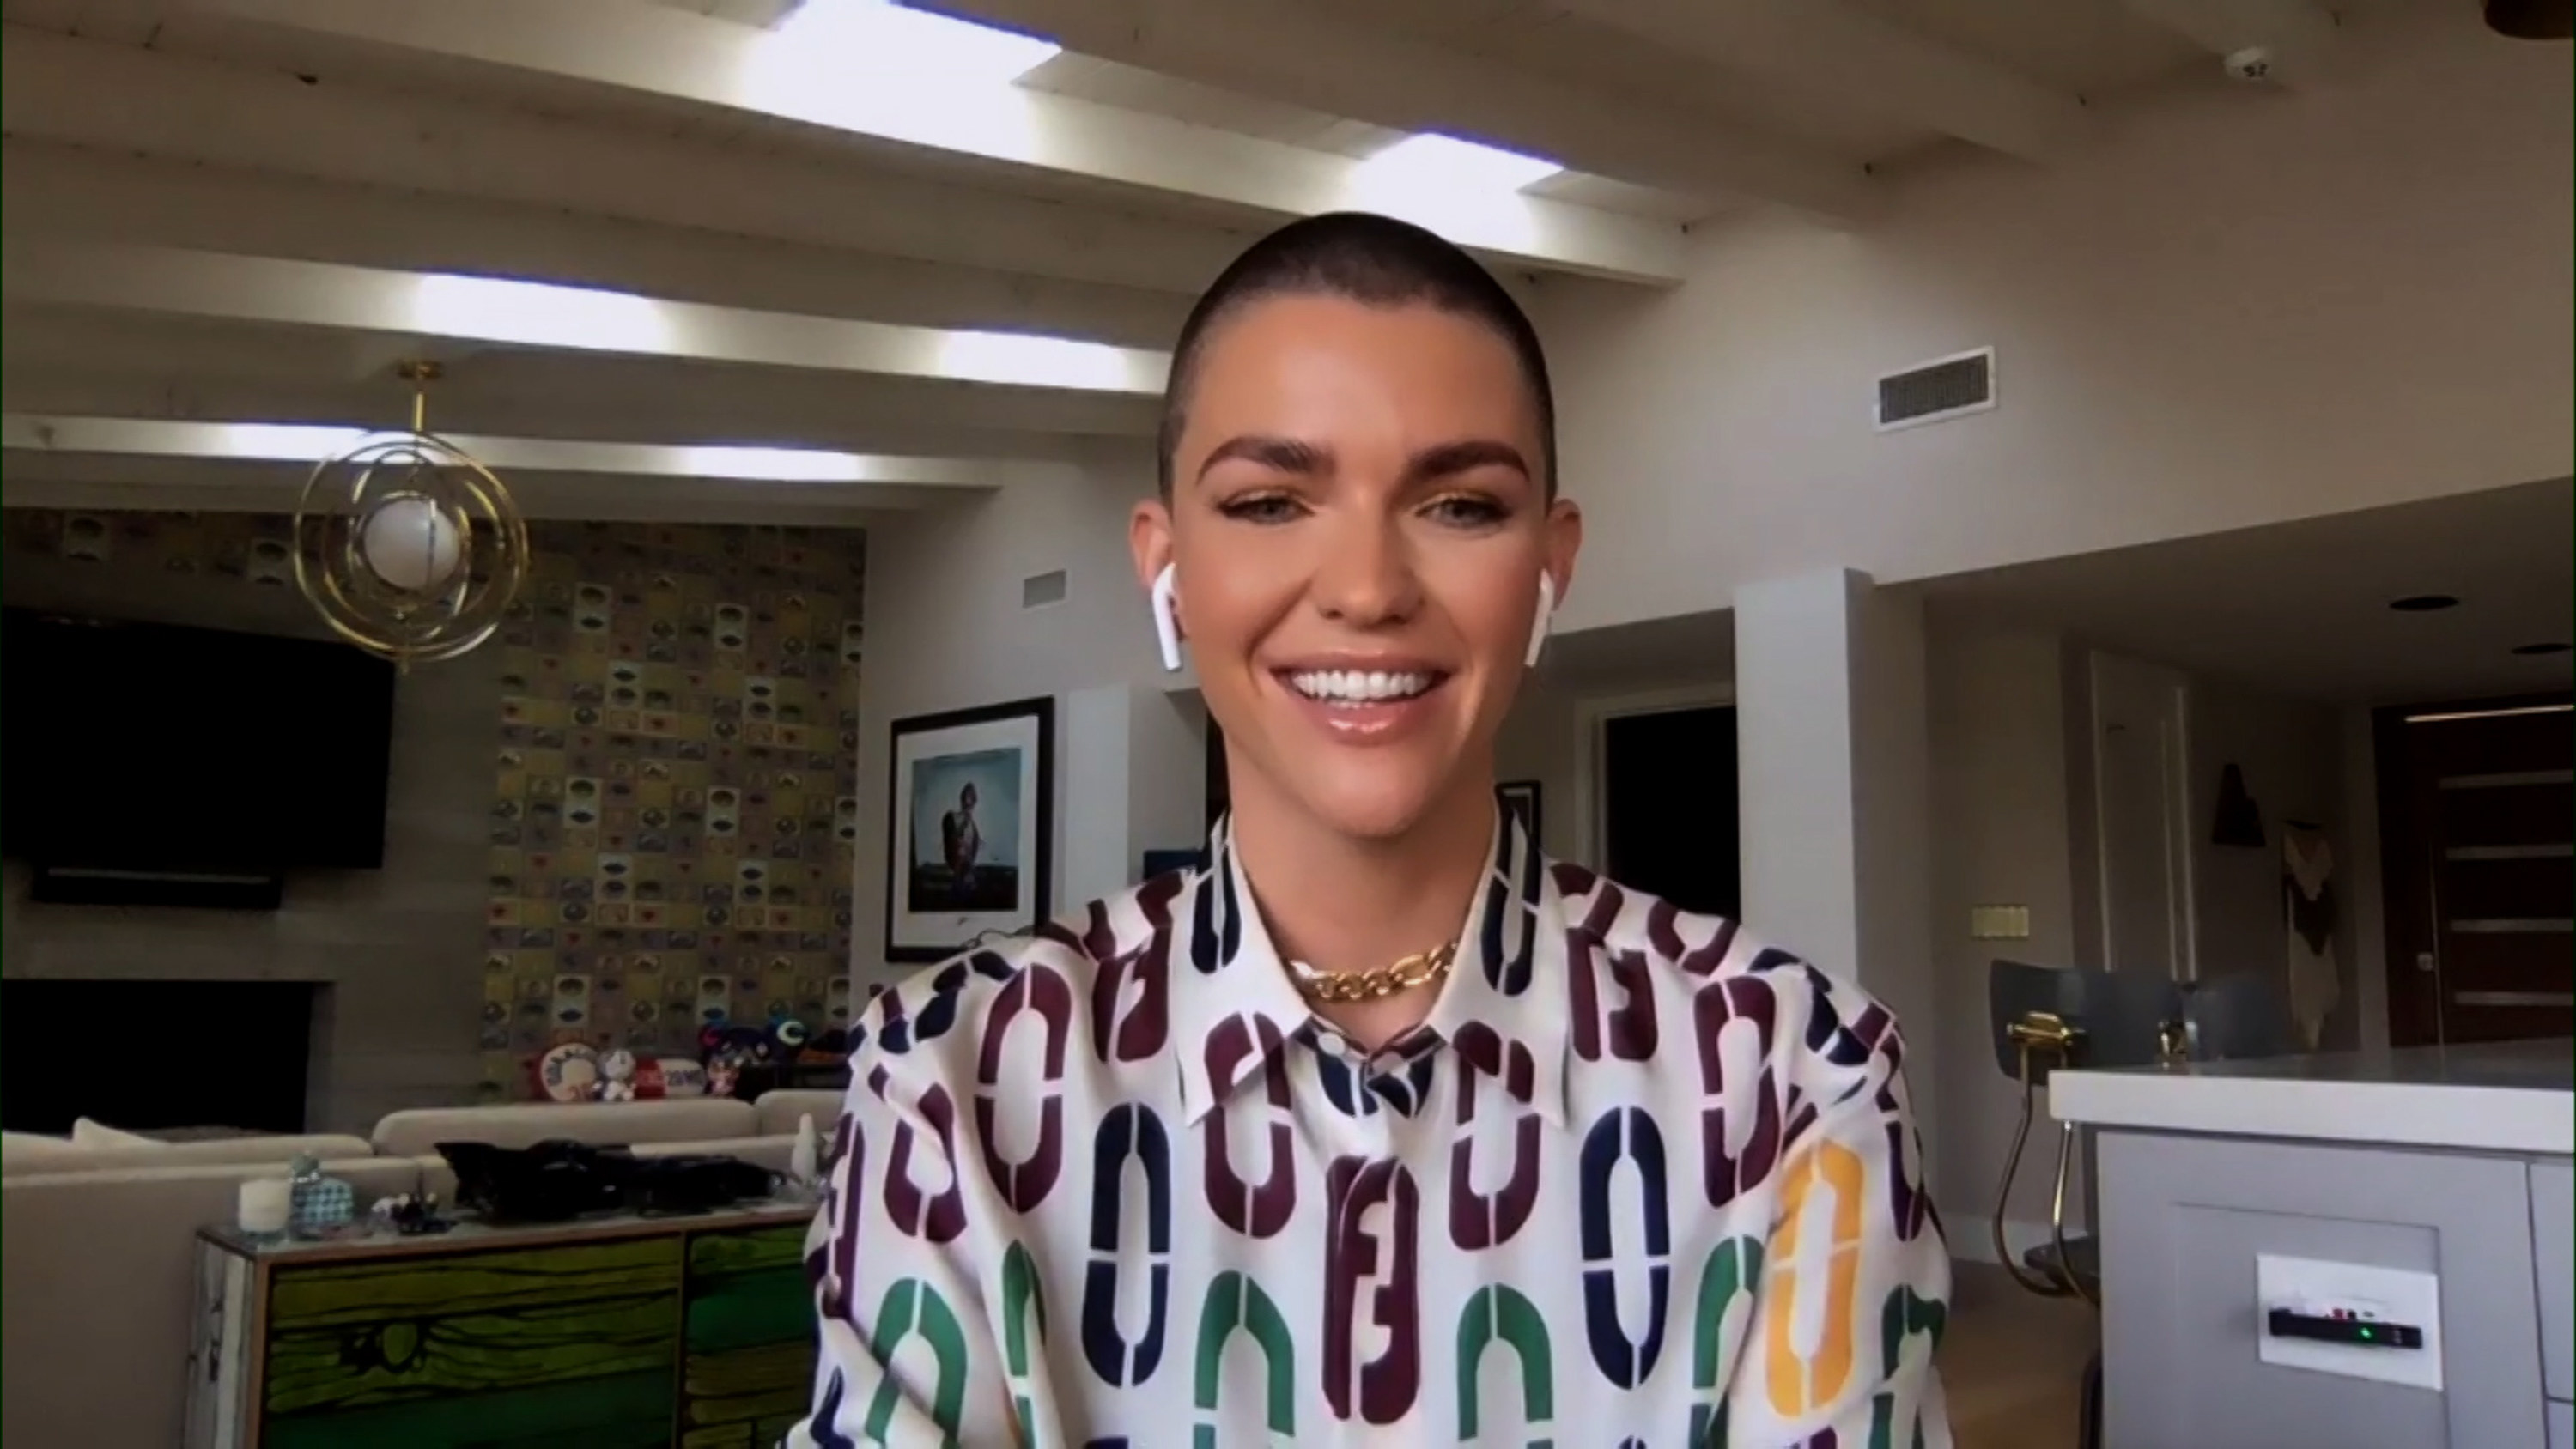 Ruby Rose sitting in a domestic setting, looking into the camera and smiling